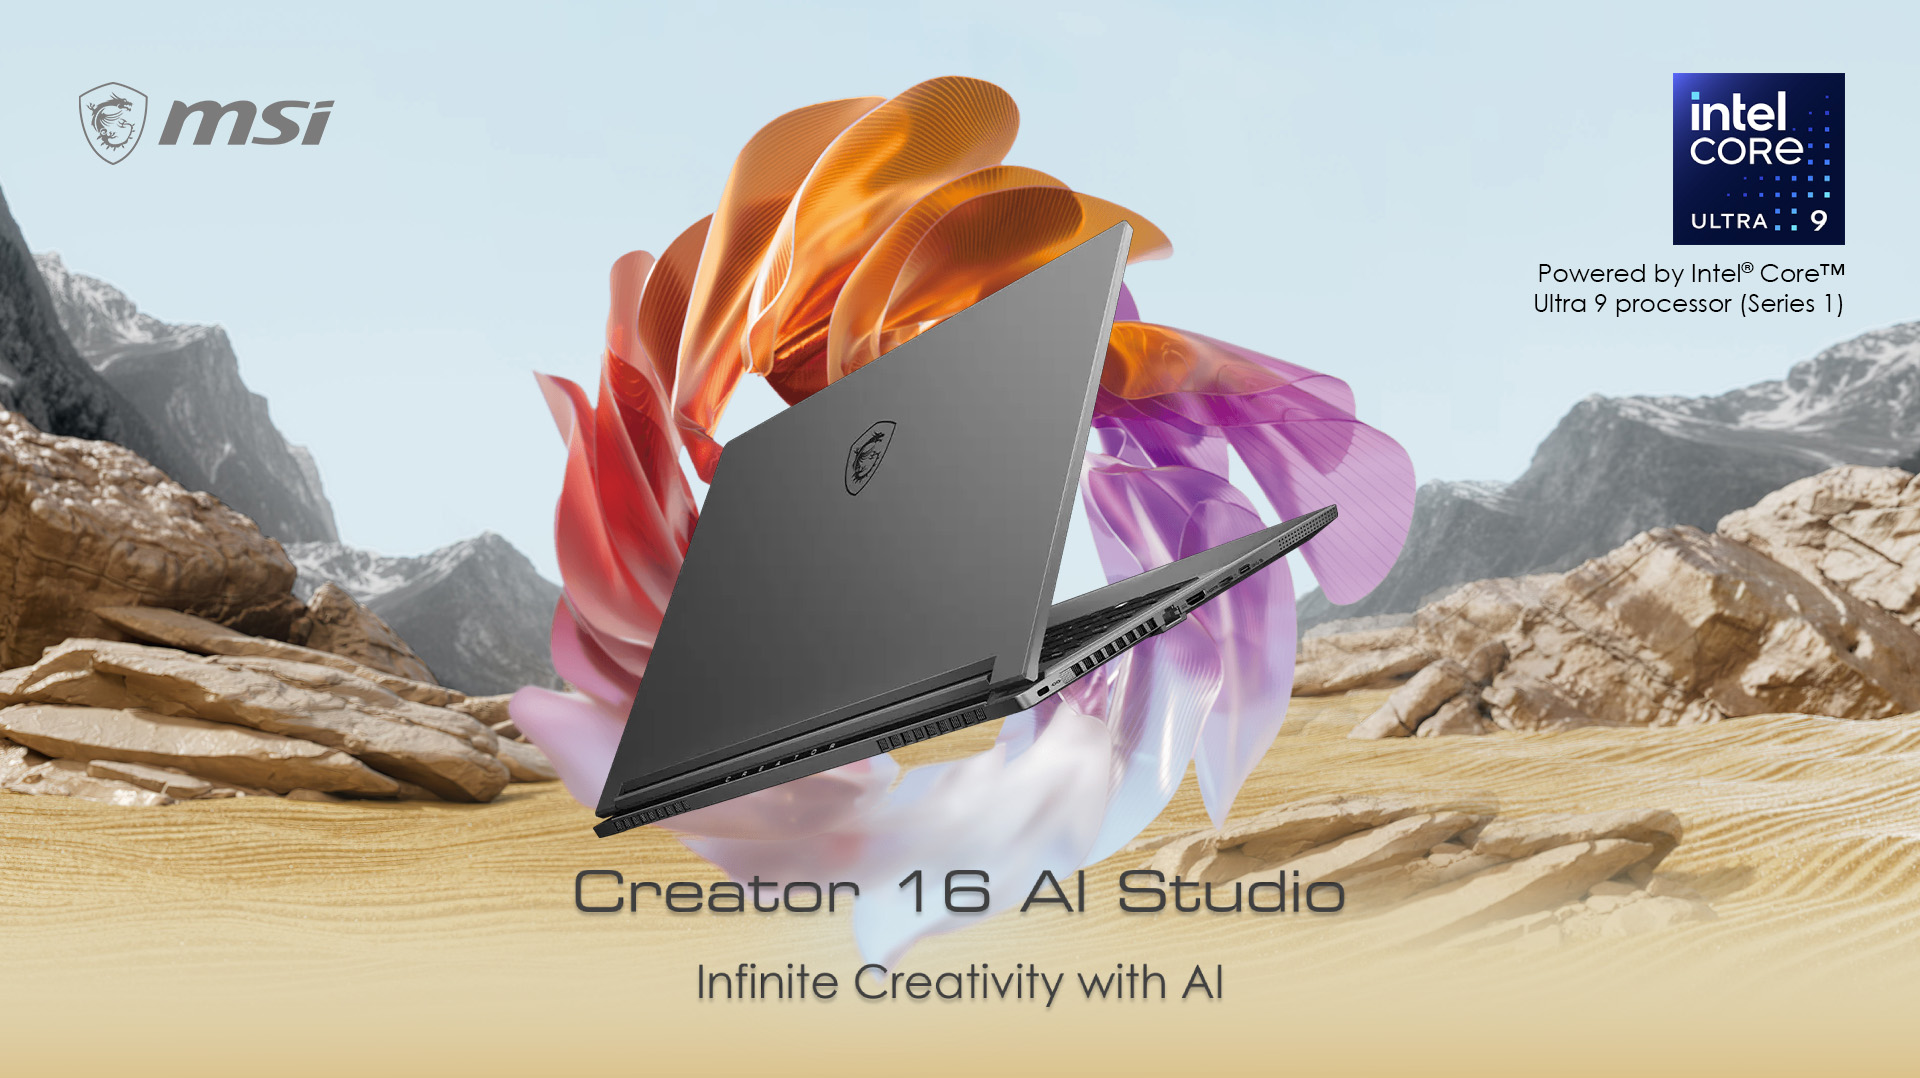 The Creator 16 AI Studio, equipped with the latest generation of Intel CPU, the new Intel AI chip (NPU), GPU, MSI's AI-Engine, and MSI's AI-Artist, provides an immersive creativity experience tailored for diverse professional creators. Empowered by AI, these laptops enhance your creativity, simplifying the realization of your ideas. In this new era, aesthetics are defined by you.